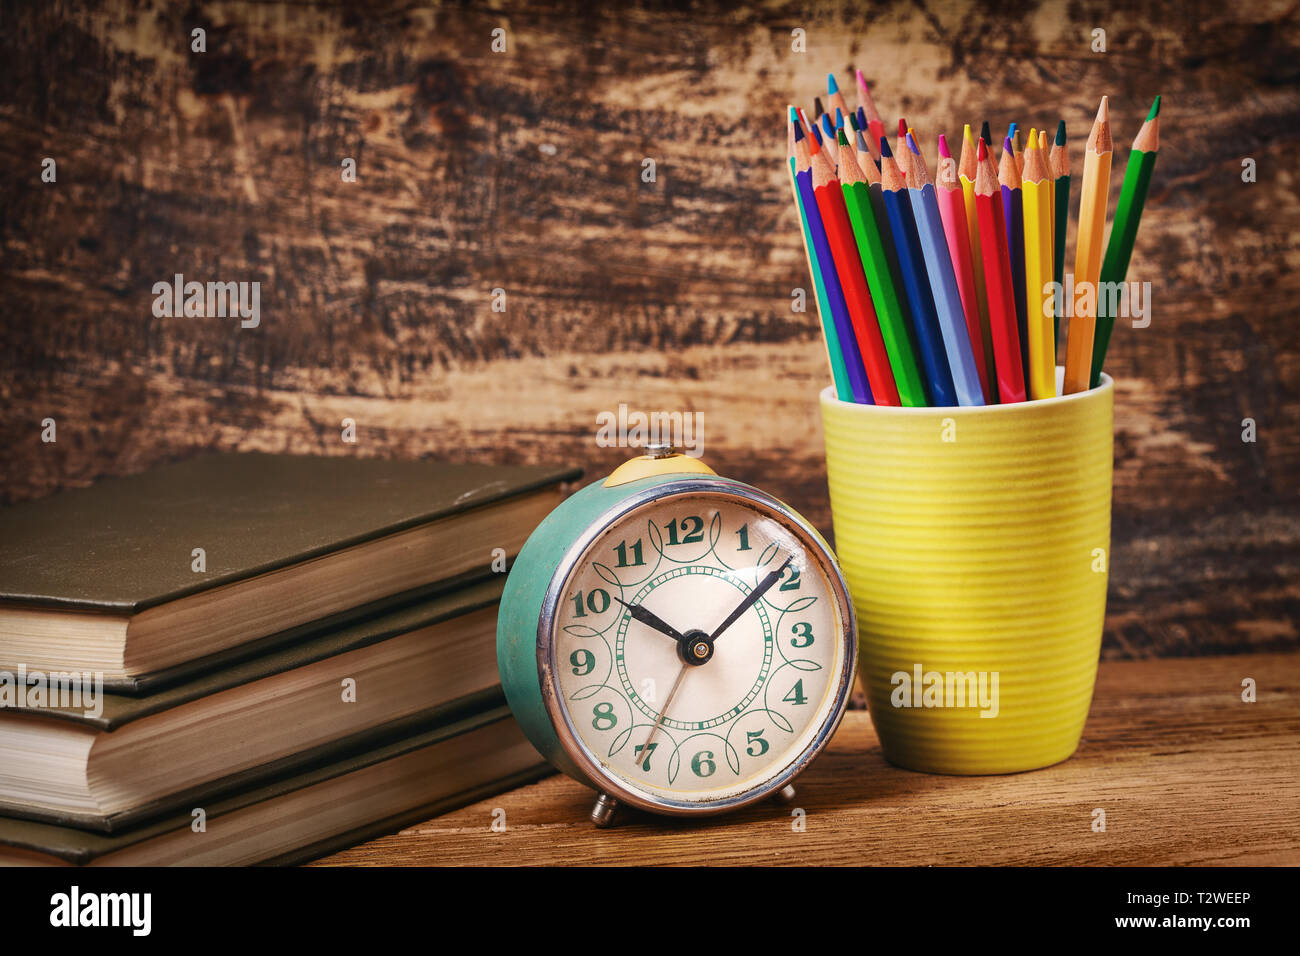 https://c8.alamy.com/comp/T2WEEP/colored-pencils-in-a-glass-next-to-books-and-watche-education-concept-on-a-wooden-background-T2WEEP.jpg